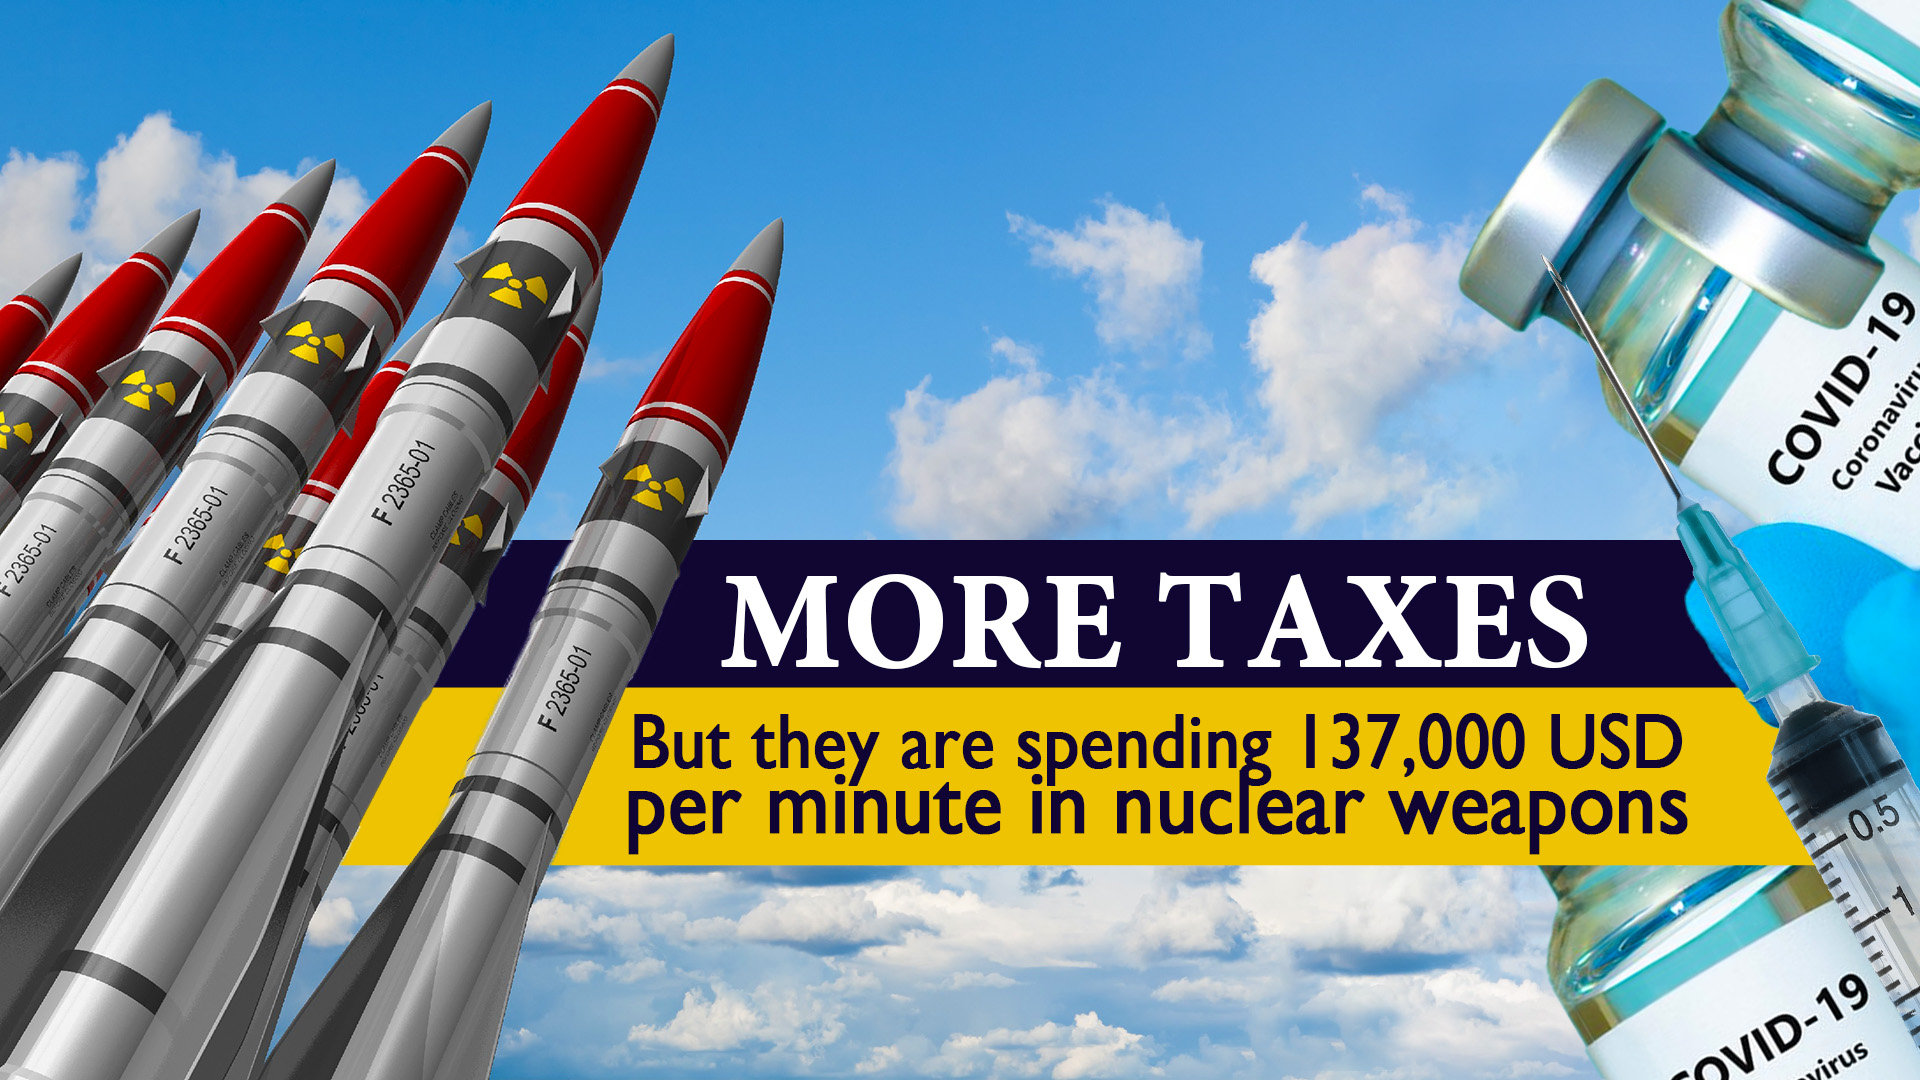 More taxes, but they are spending 137,000 USD per minute in nuclear weapons